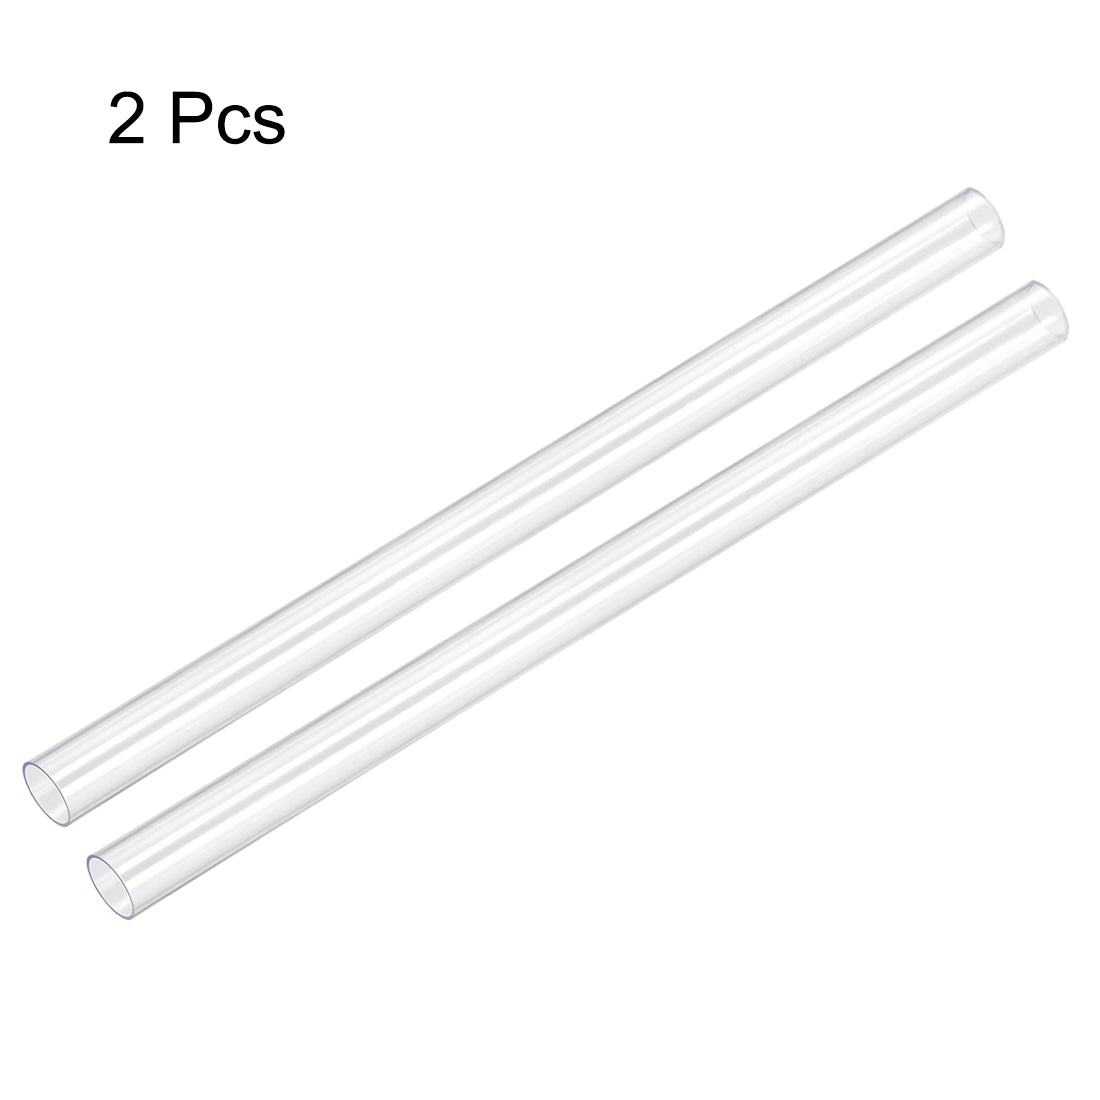 uxcell Uxcell PC Rigid Round Tubing Clear 8mm ID x 10mm OD, 0.5M/1.64Ft Length 2pcs